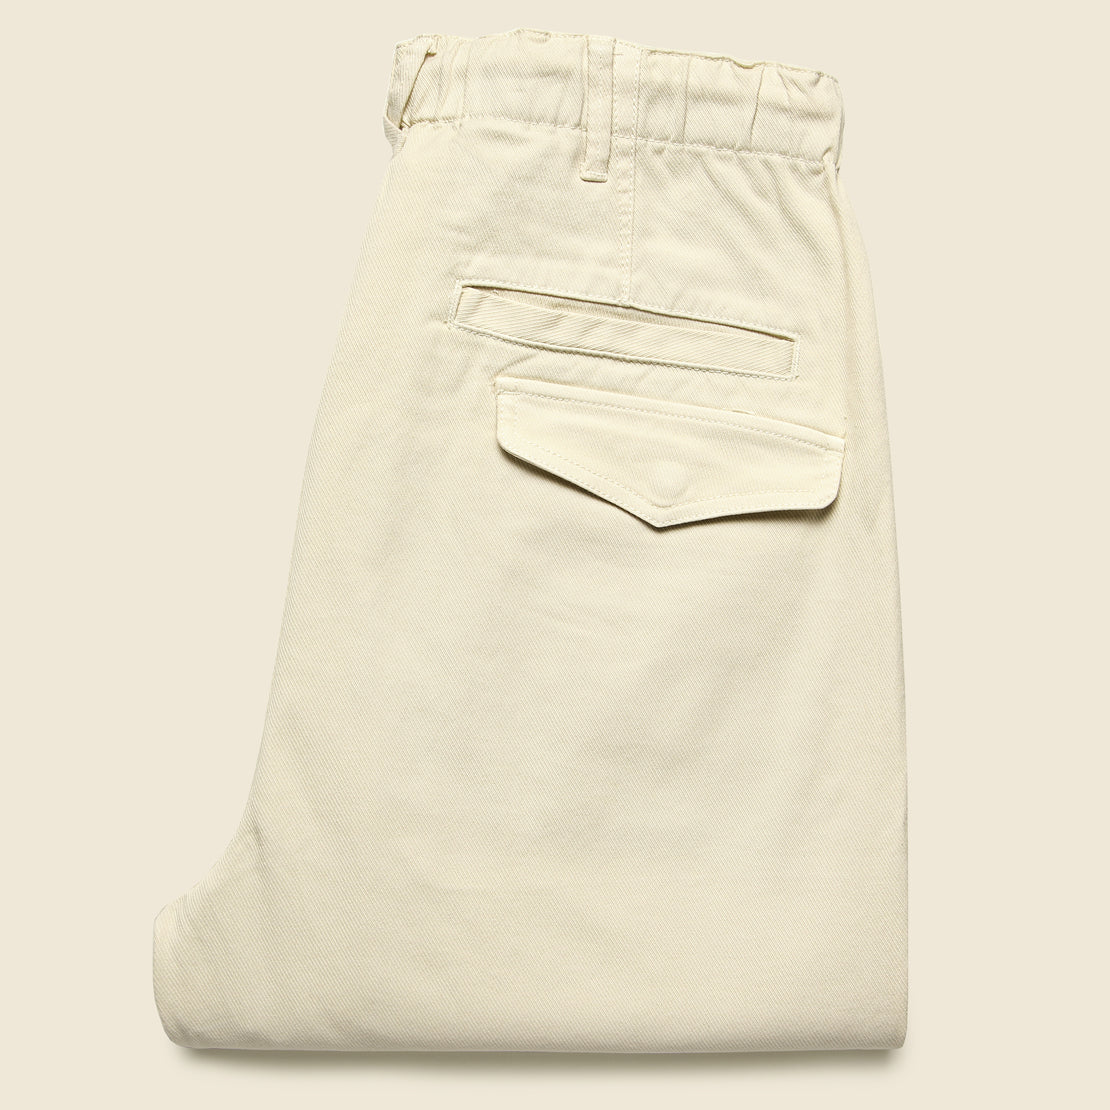 Pull On Button Fly Pants - Oat Milk - Alex Mill - STAG Provisions - Pants - Twill